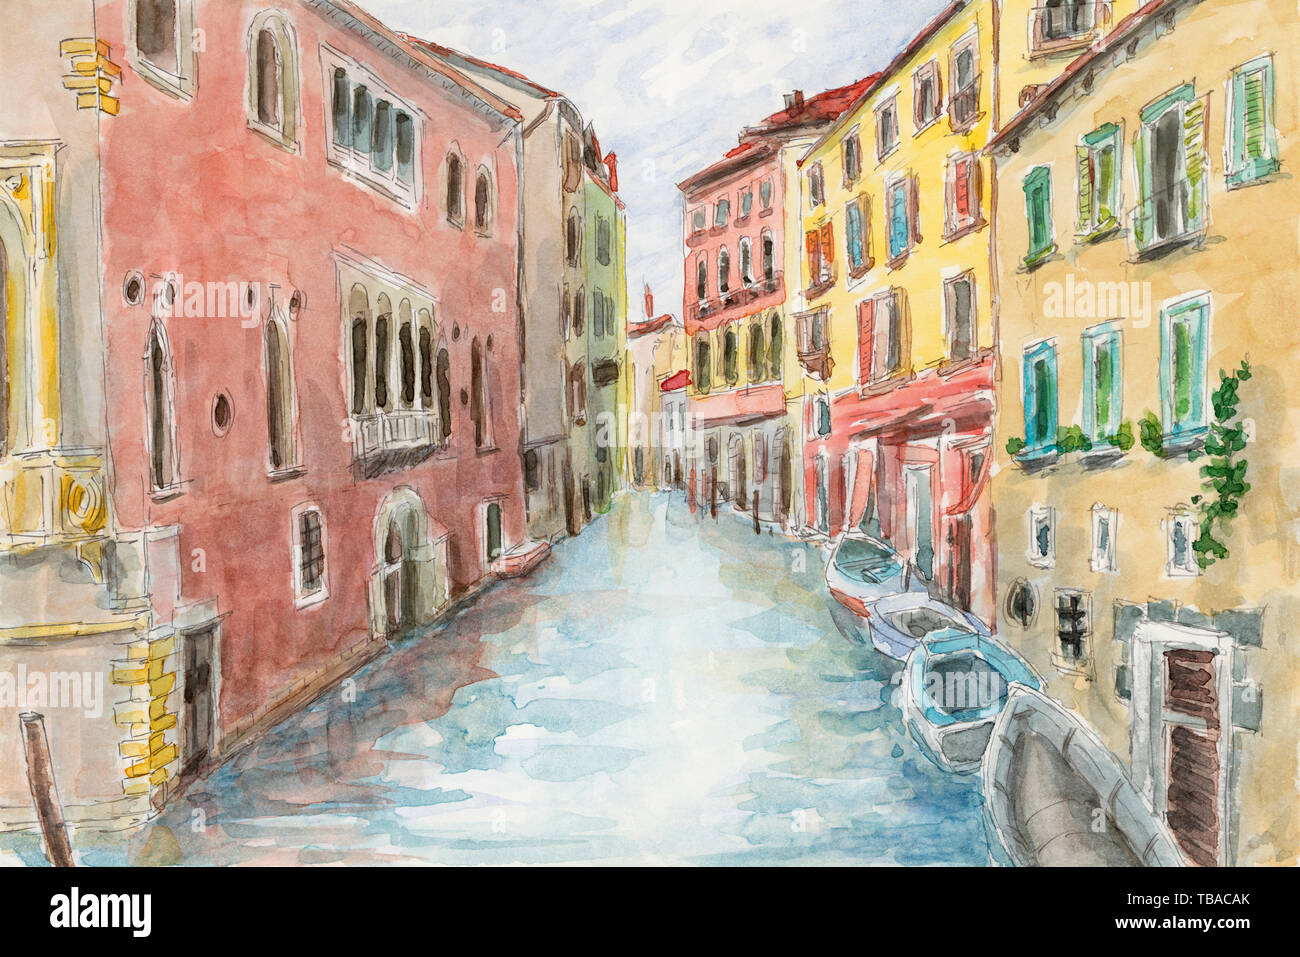 Canal between ancient buildings. Venice, Italy. Pencil and watercolor on paper. Stock Photo